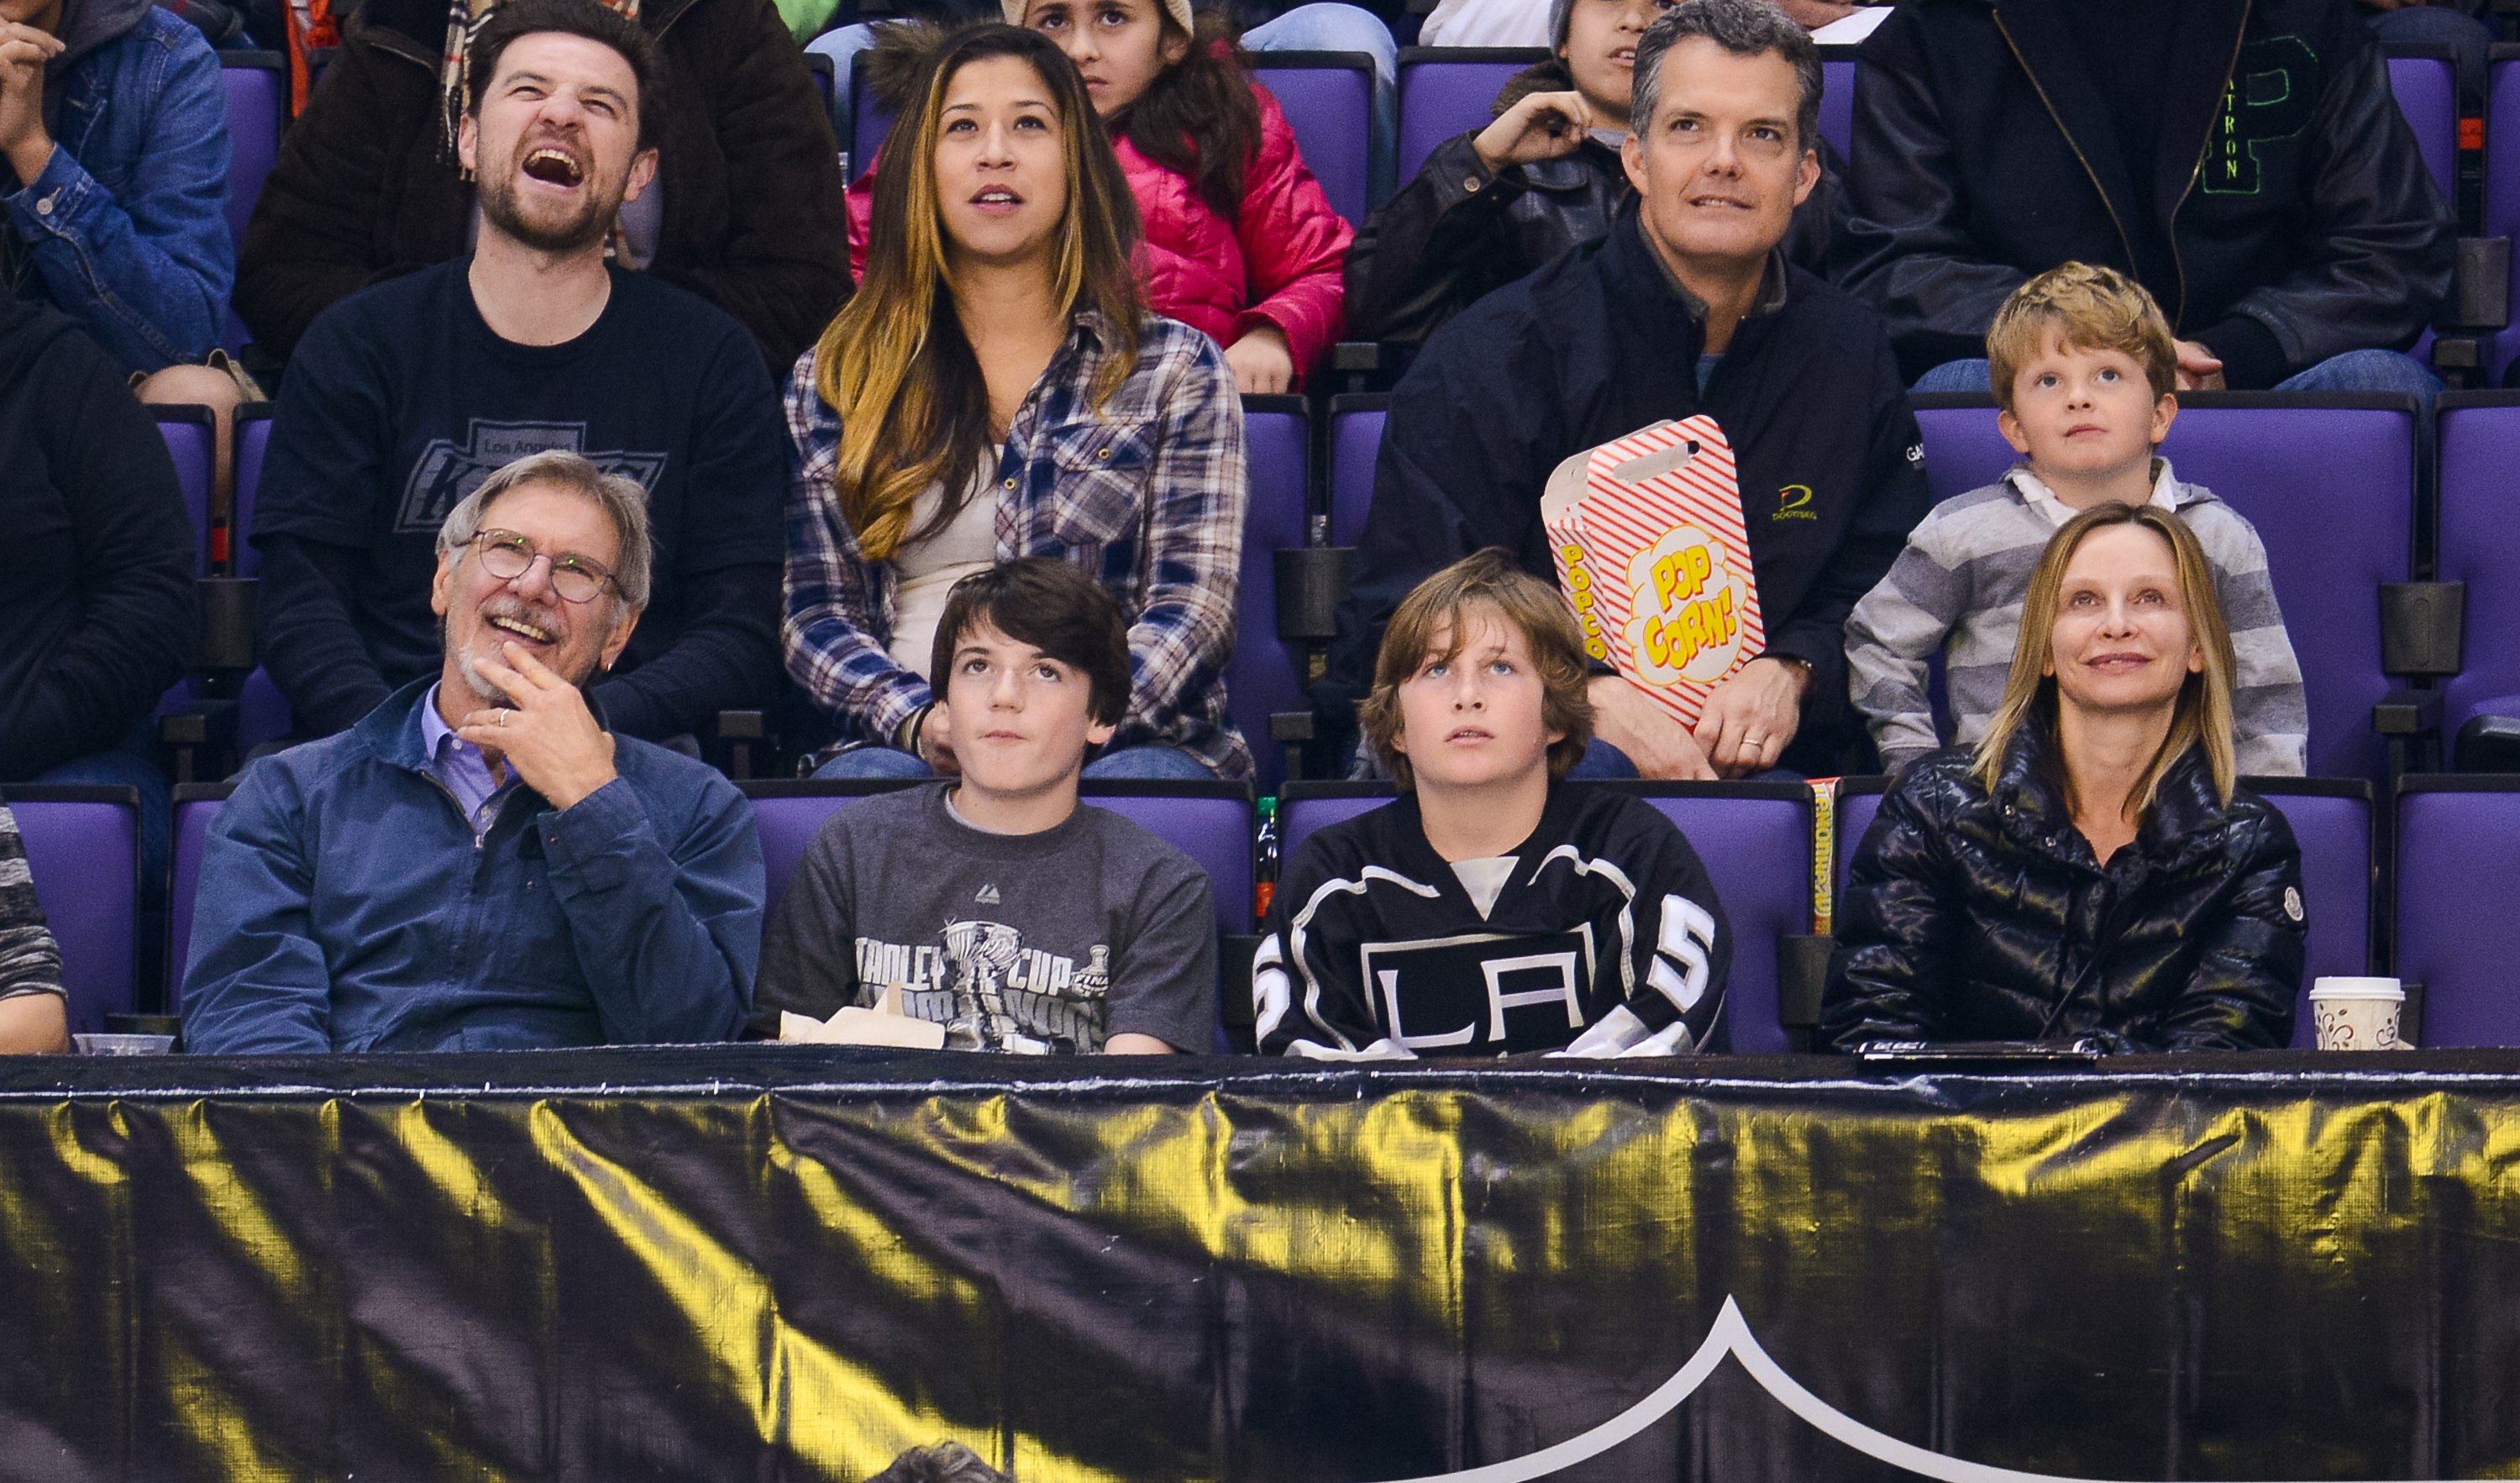 (L-R) Harrison Ford, Liam Flockhart and Calista Flockhart attend a hockey game between the Carolina Hurricanes and the Los Angeles Kings at Staples Center on March 1, 2014 in Los Angeles, California